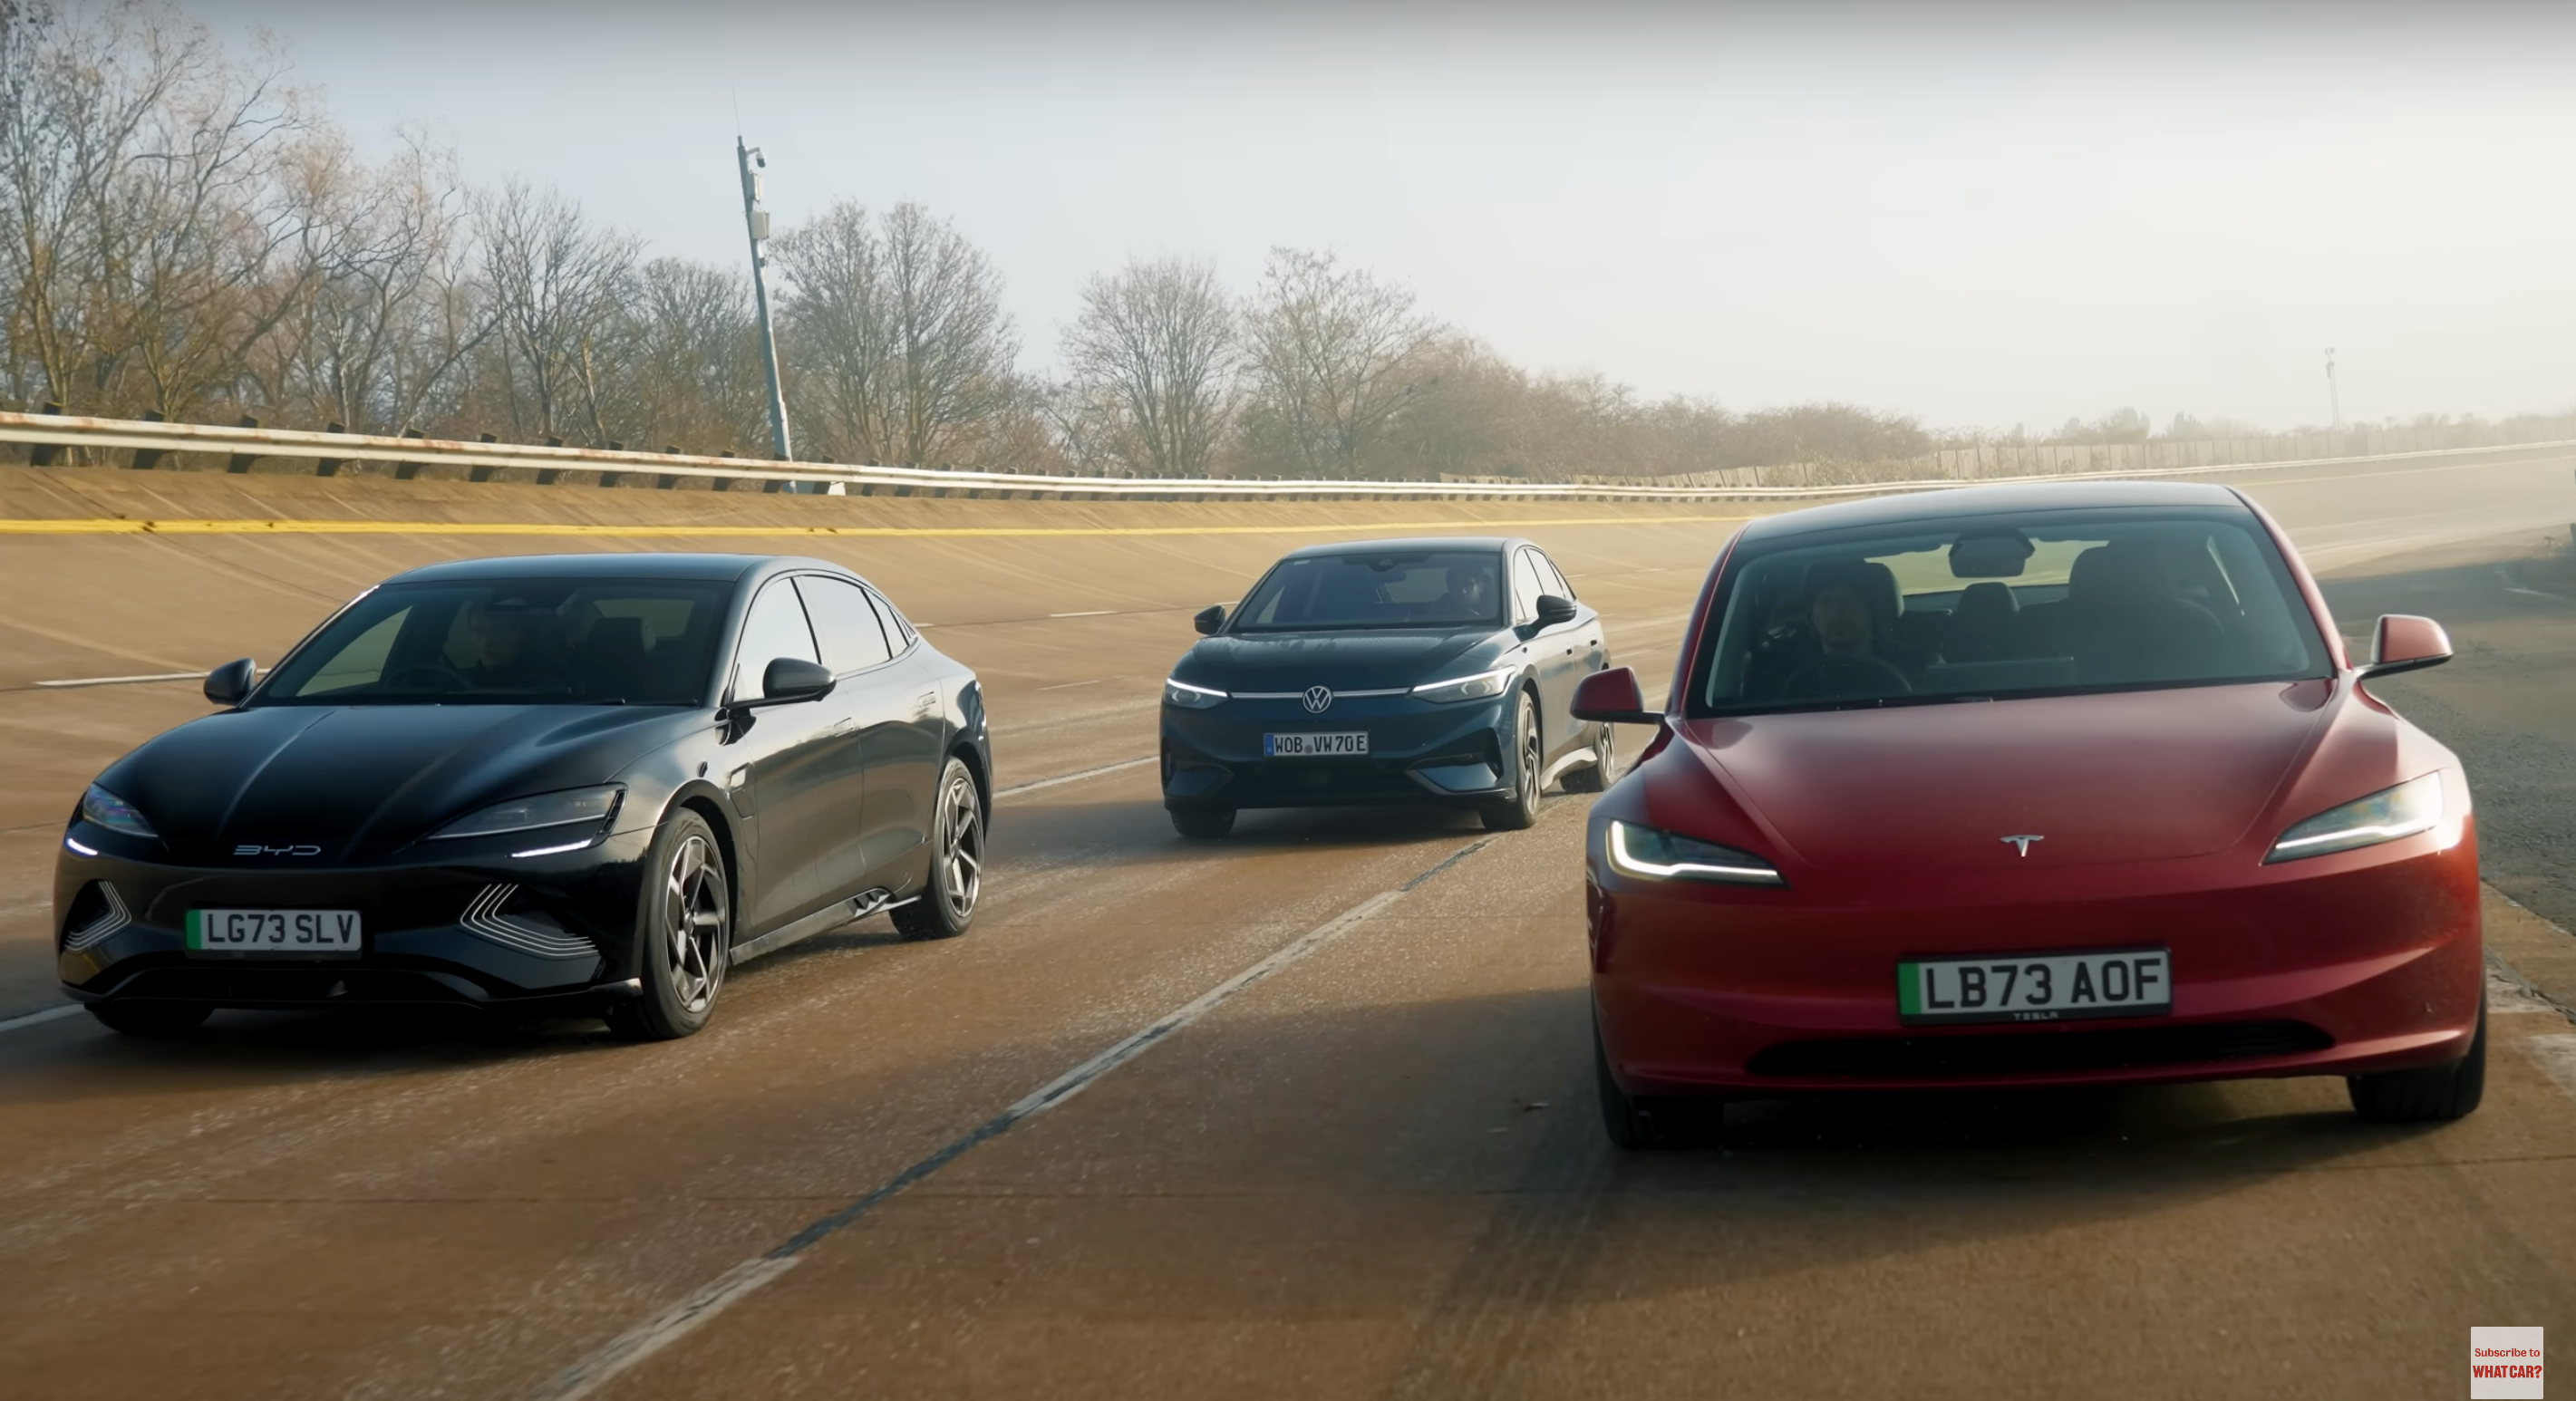 Tesla Model 3 Highland Cruises to Victory in UK Electric Sedan Showdown, Tesla, Tesla Model 3 Highland and more